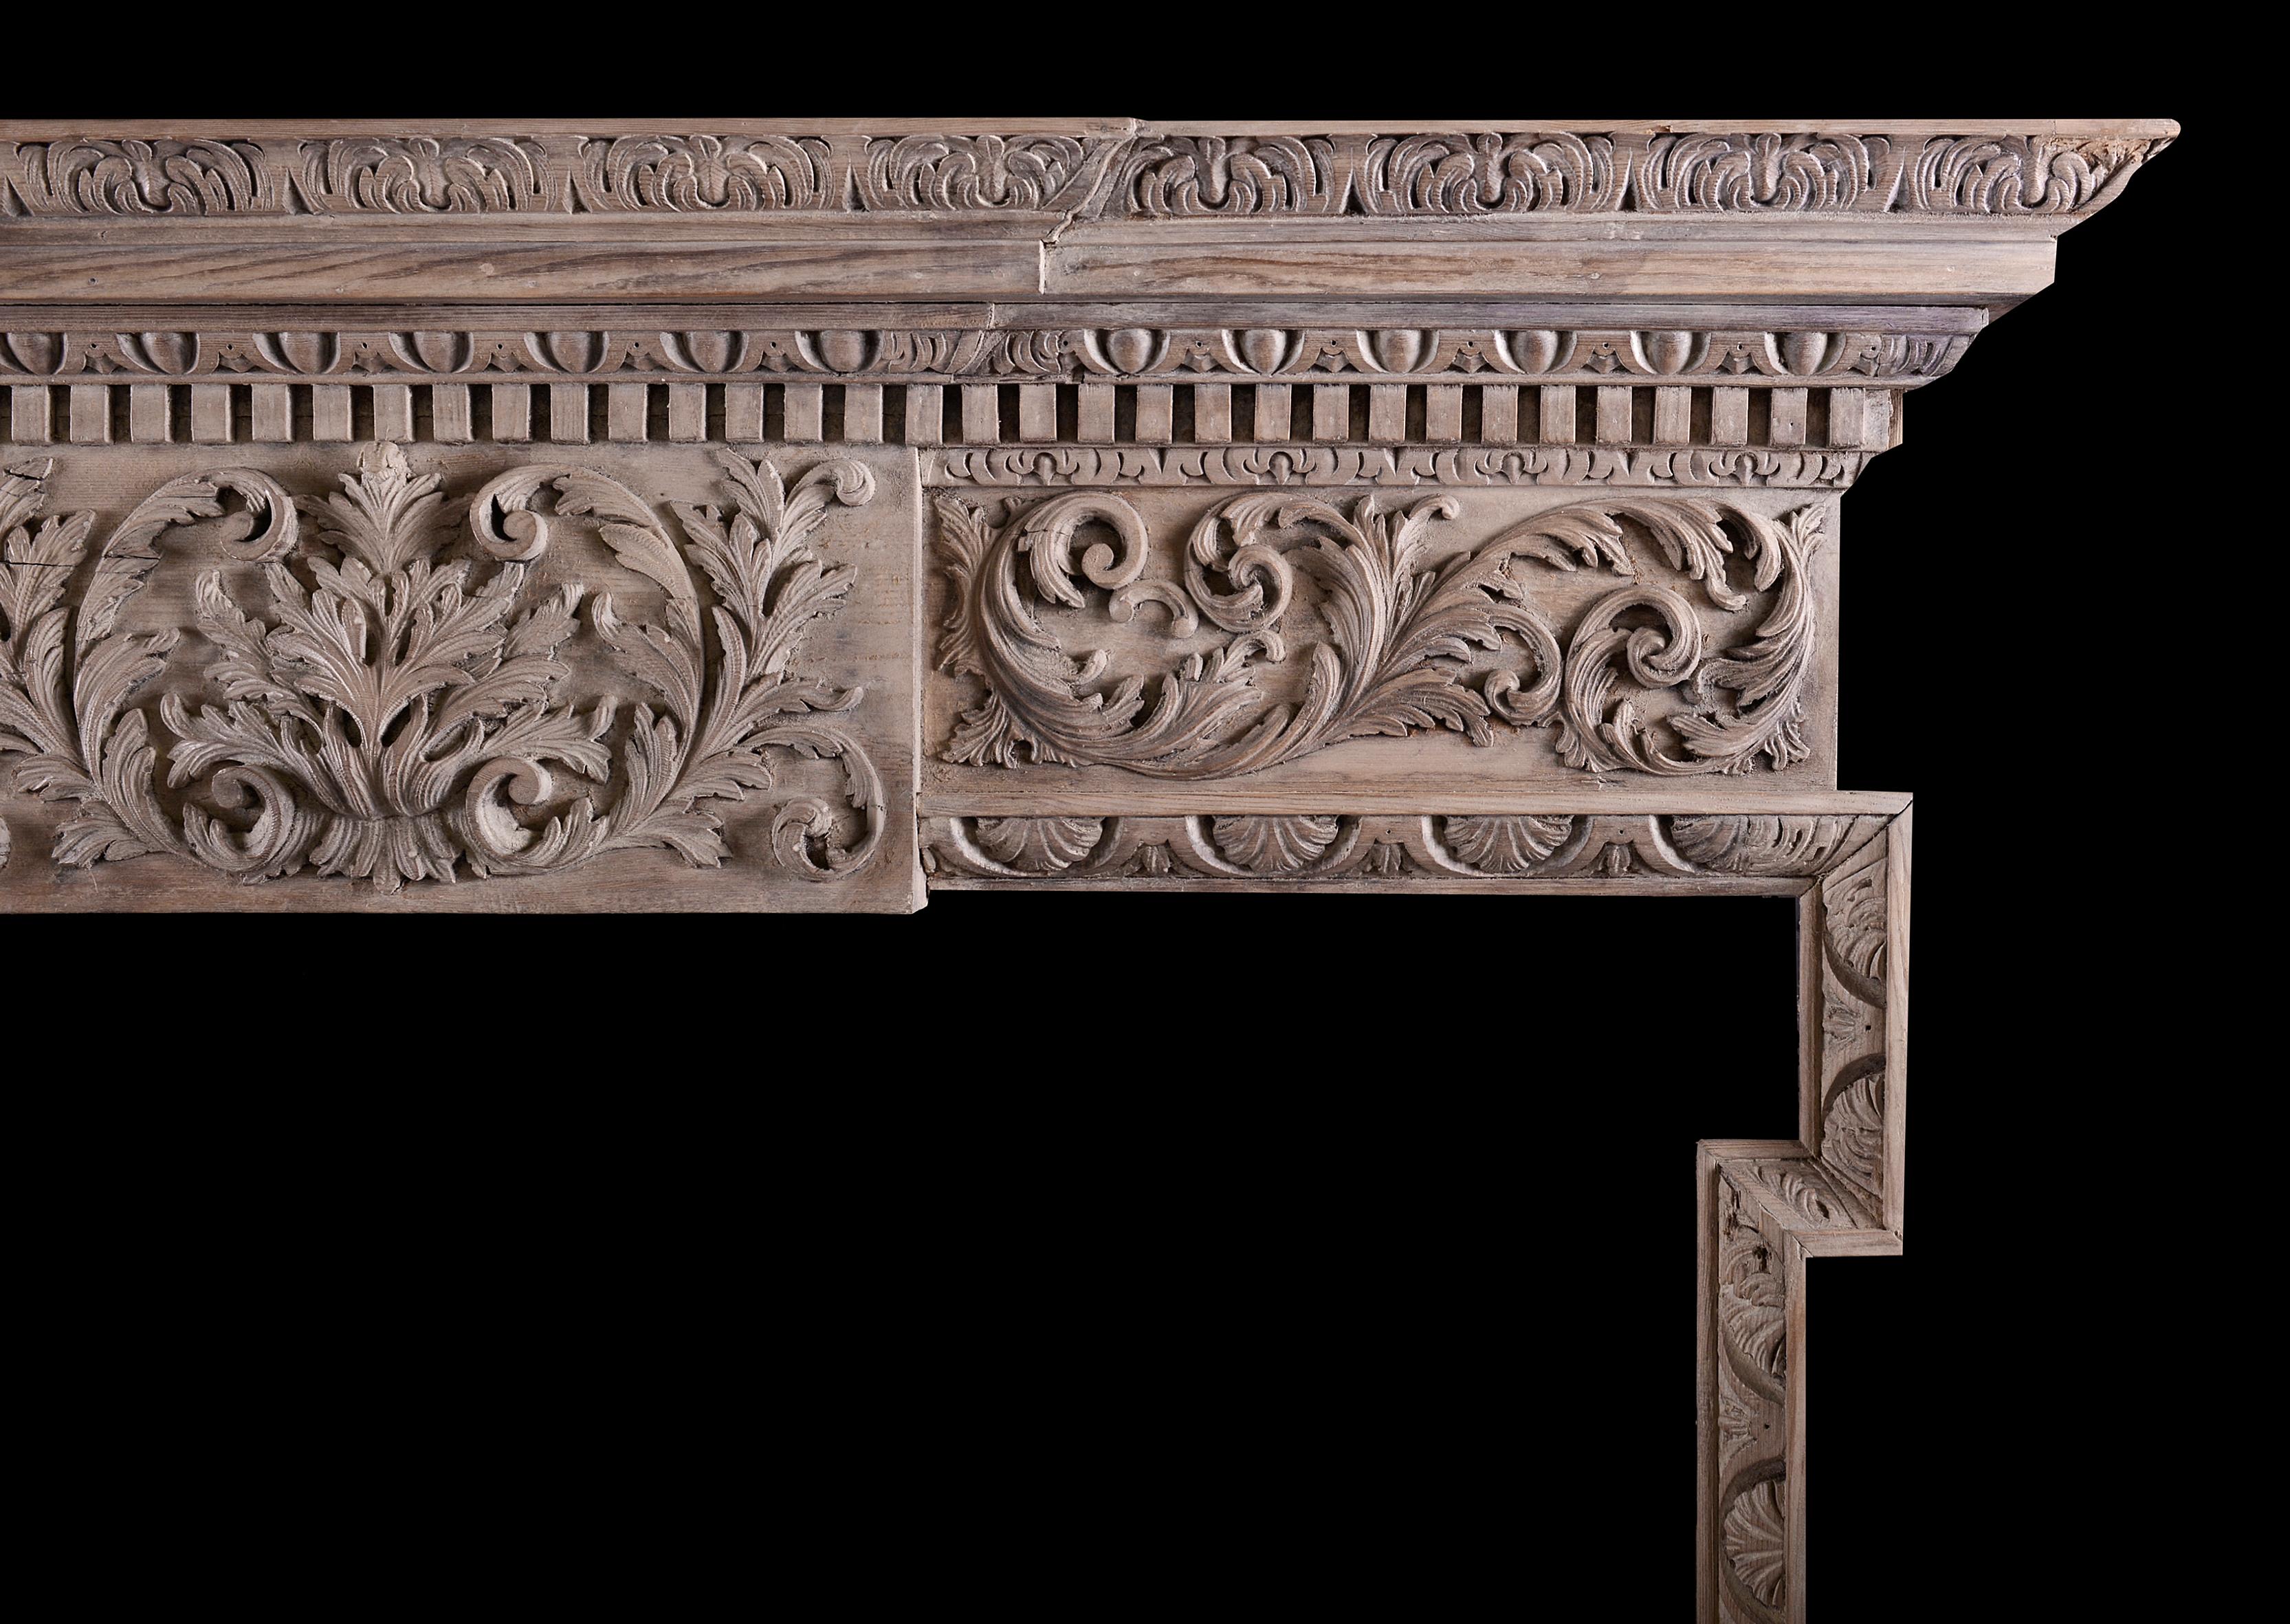 A good quality carved timber fireplace in the Georgian style. The jambs with crescent shaped shells throughout, the frieze with carved scrolls and foliage and elaborately carved centre plaque. The shelf with dentils, egg-and-tongue and acanthus